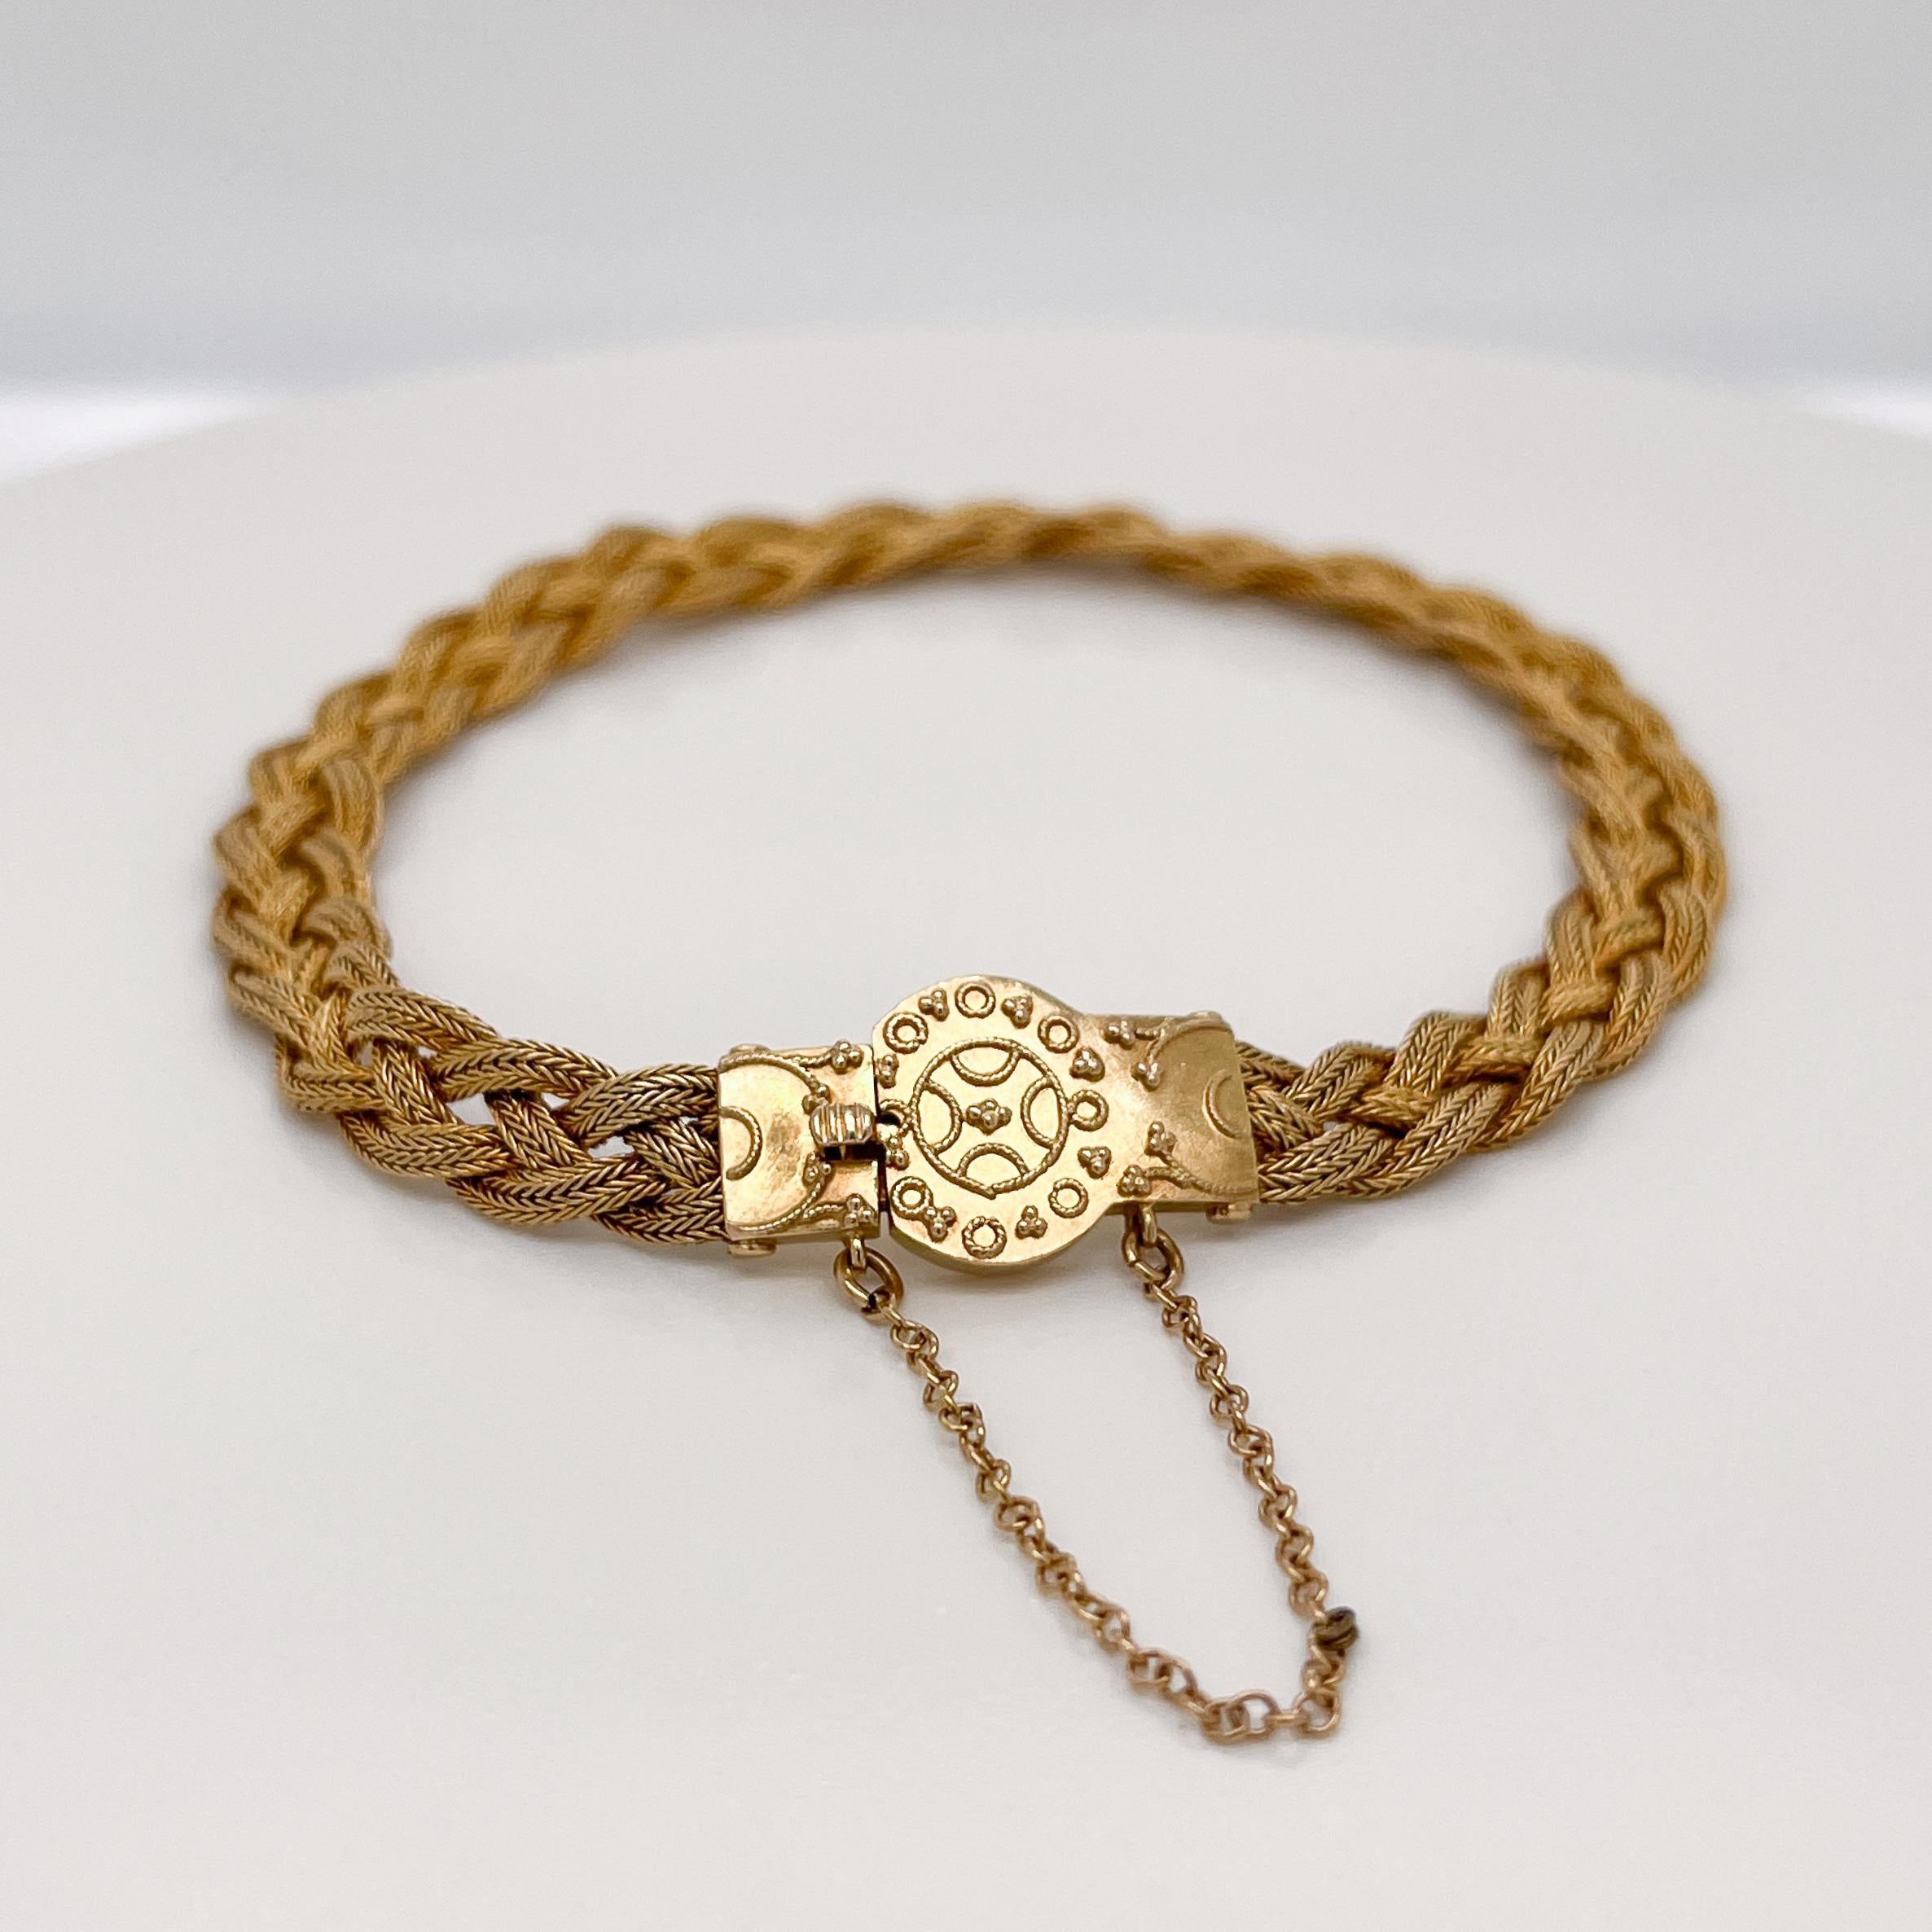 Antique Woven 14 Karat Gold Etruscan Style Bracelet In Good Condition For Sale In Philadelphia, PA